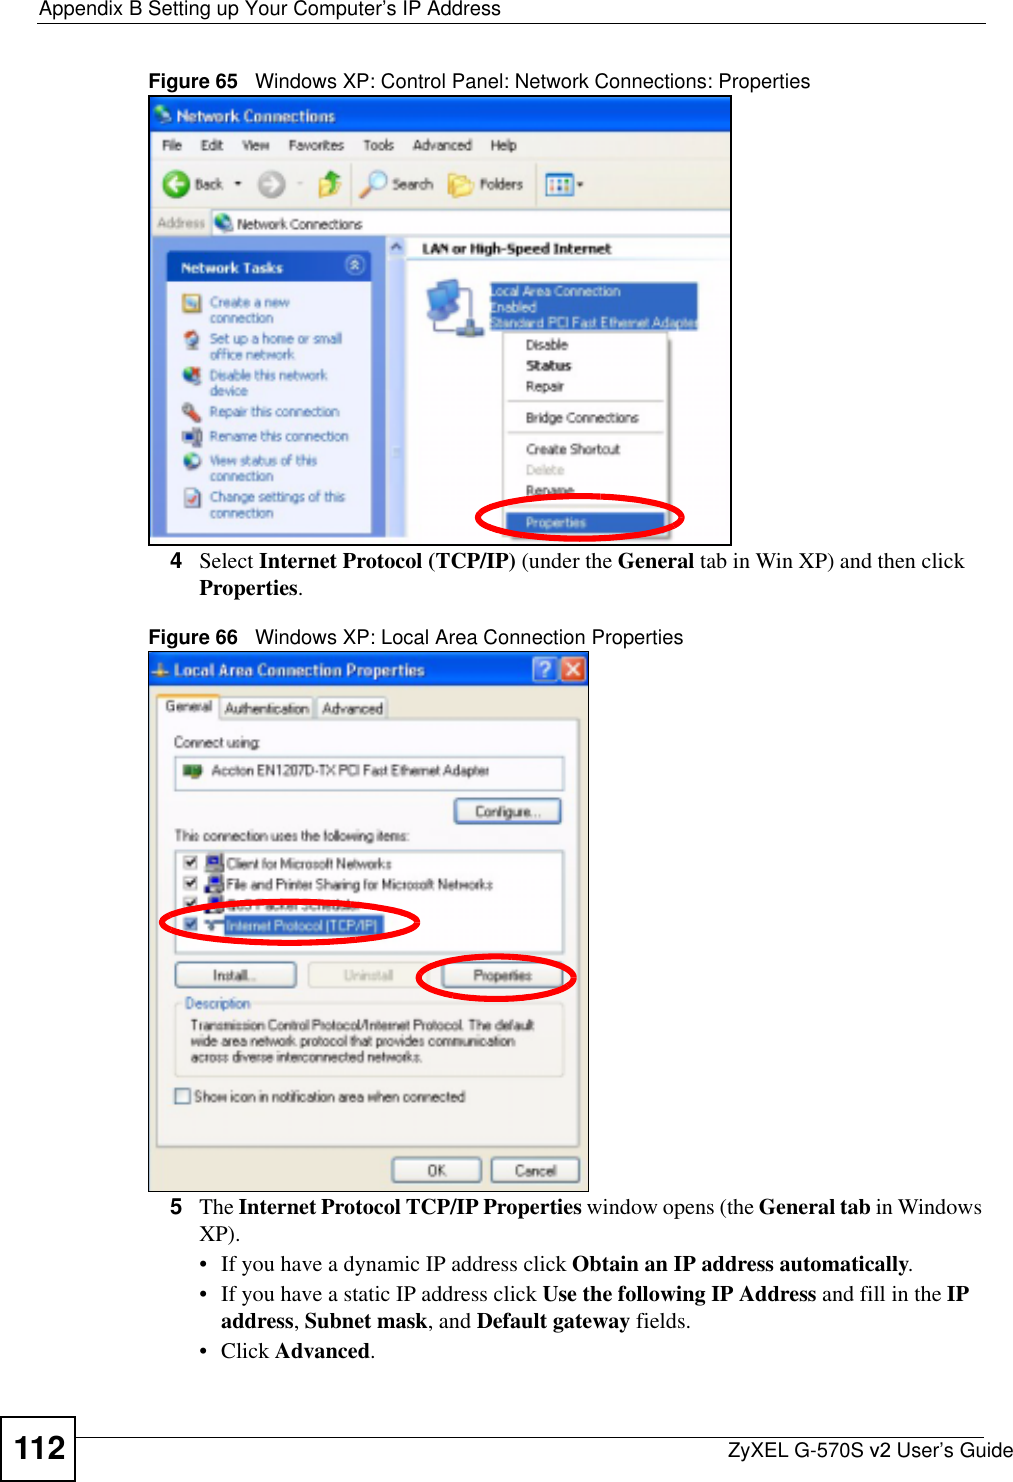 Appendix B Setting up Your Computer’s IP AddressZyXEL G-570S v2 User’s Guide112Figure 65   Windows XP: Control Panel: Network Connections: Properties4Select Internet Protocol (TCP/IP) (under the General tab in Win XP) and then click Properties.Figure 66   Windows XP: Local Area Connection Properties5The Internet Protocol TCP/IP Properties window opens (the General tab in Windows XP).• If you have a dynamic IP address click Obtain an IP address automatically.• If you have a static IP address click Use the following IP Address and fill in the IPaddress,Subnet mask, and Default gateway fields. • Click Advanced.